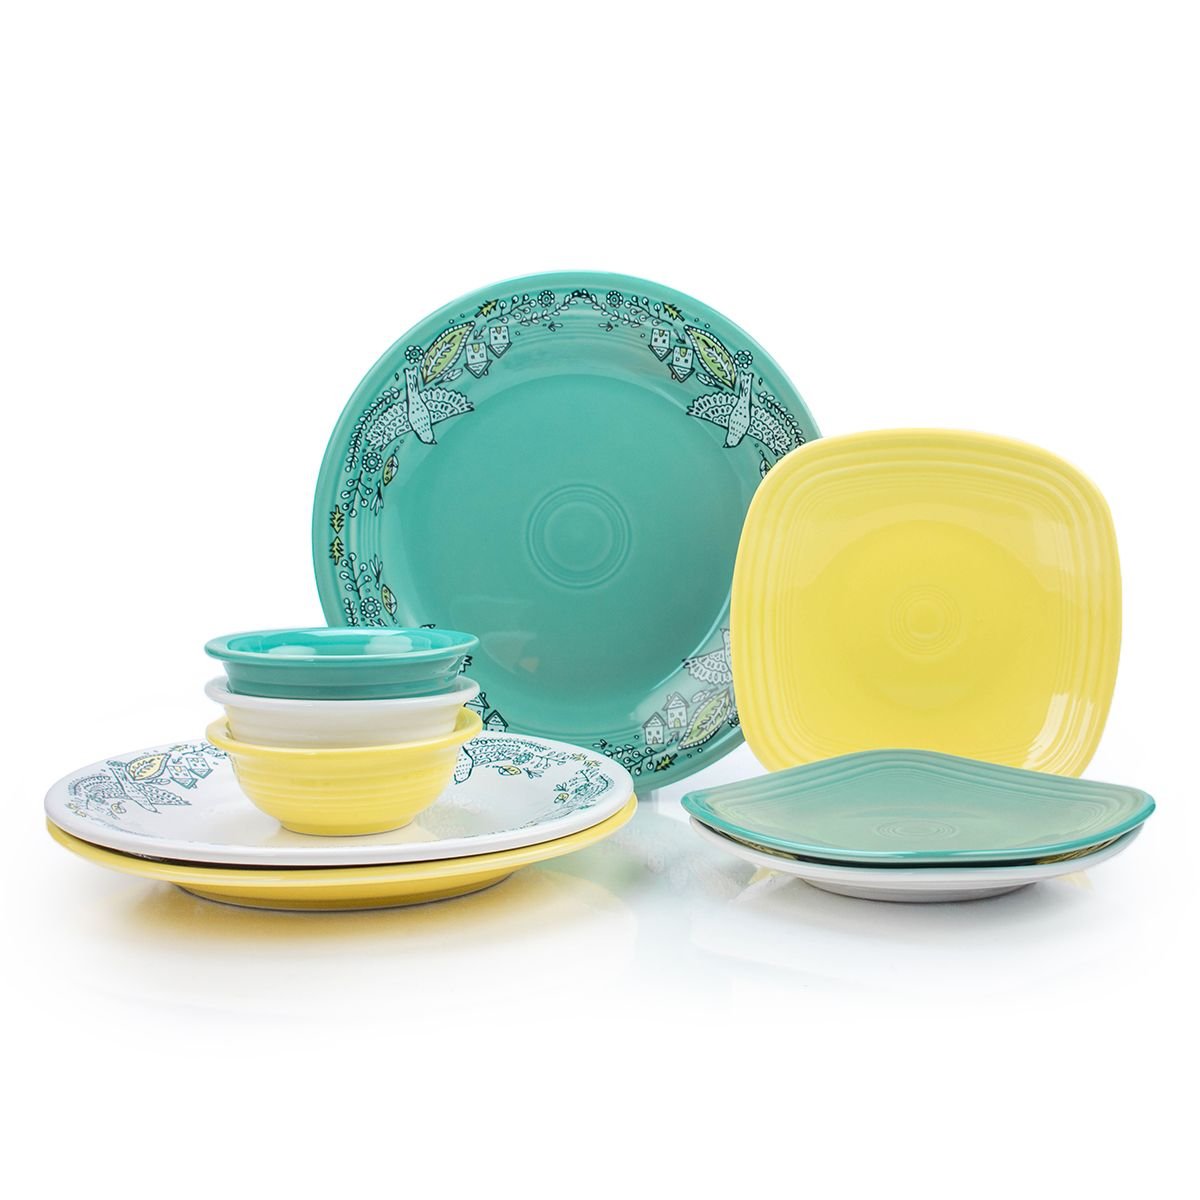 Luncheon Plate Turquoise 9